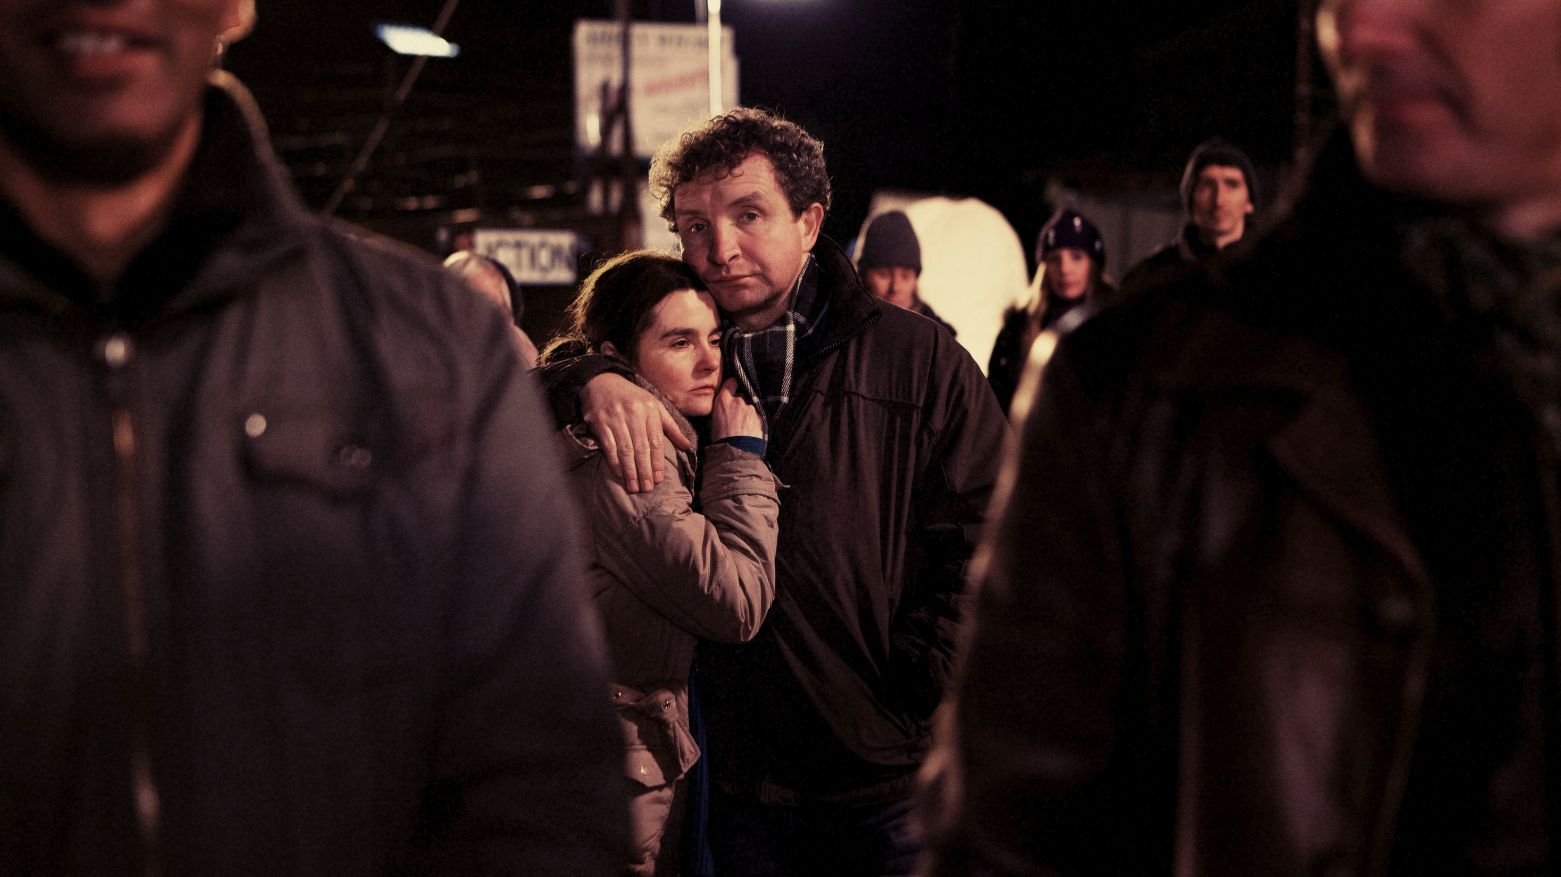 Shirley Henderson, Eddie Marsan standing in front of a crowd posing for the camera